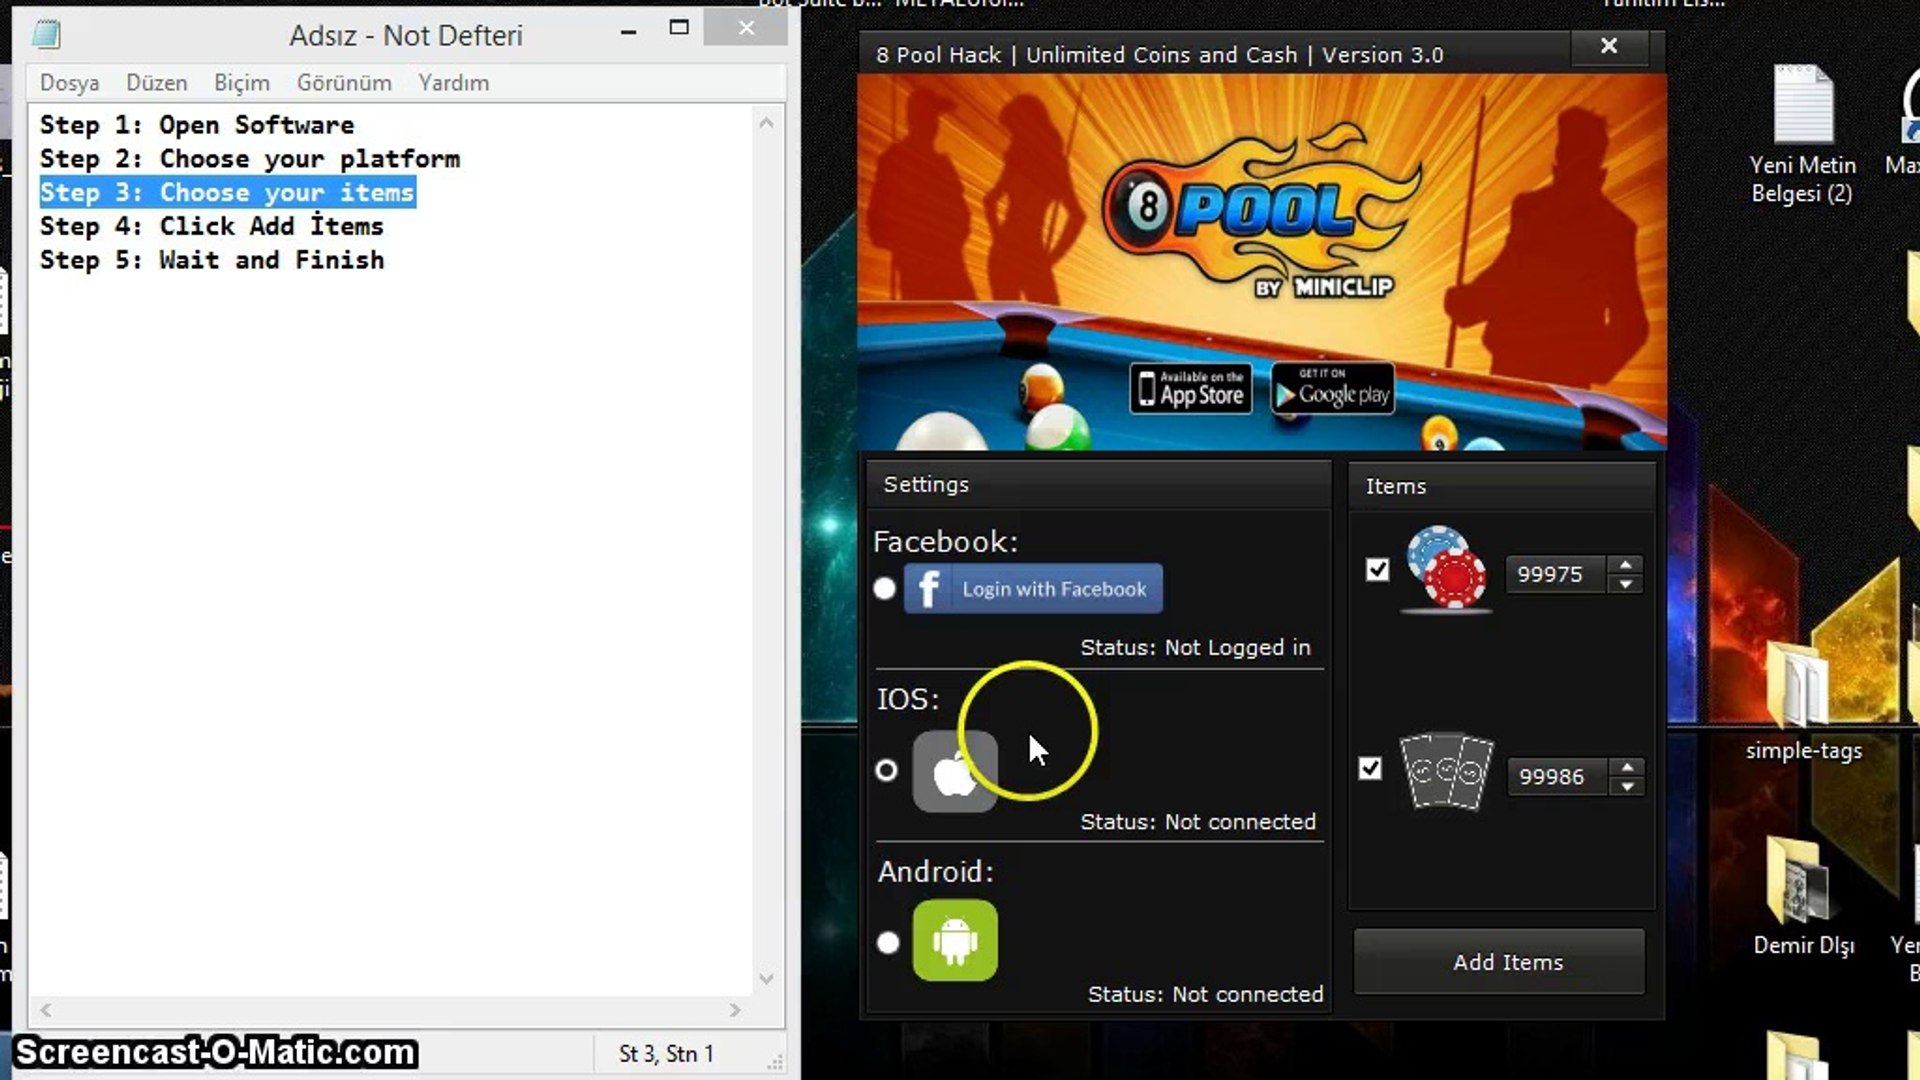 8 Pool Hack - Unlimited Coin and Cash v3.0 - 